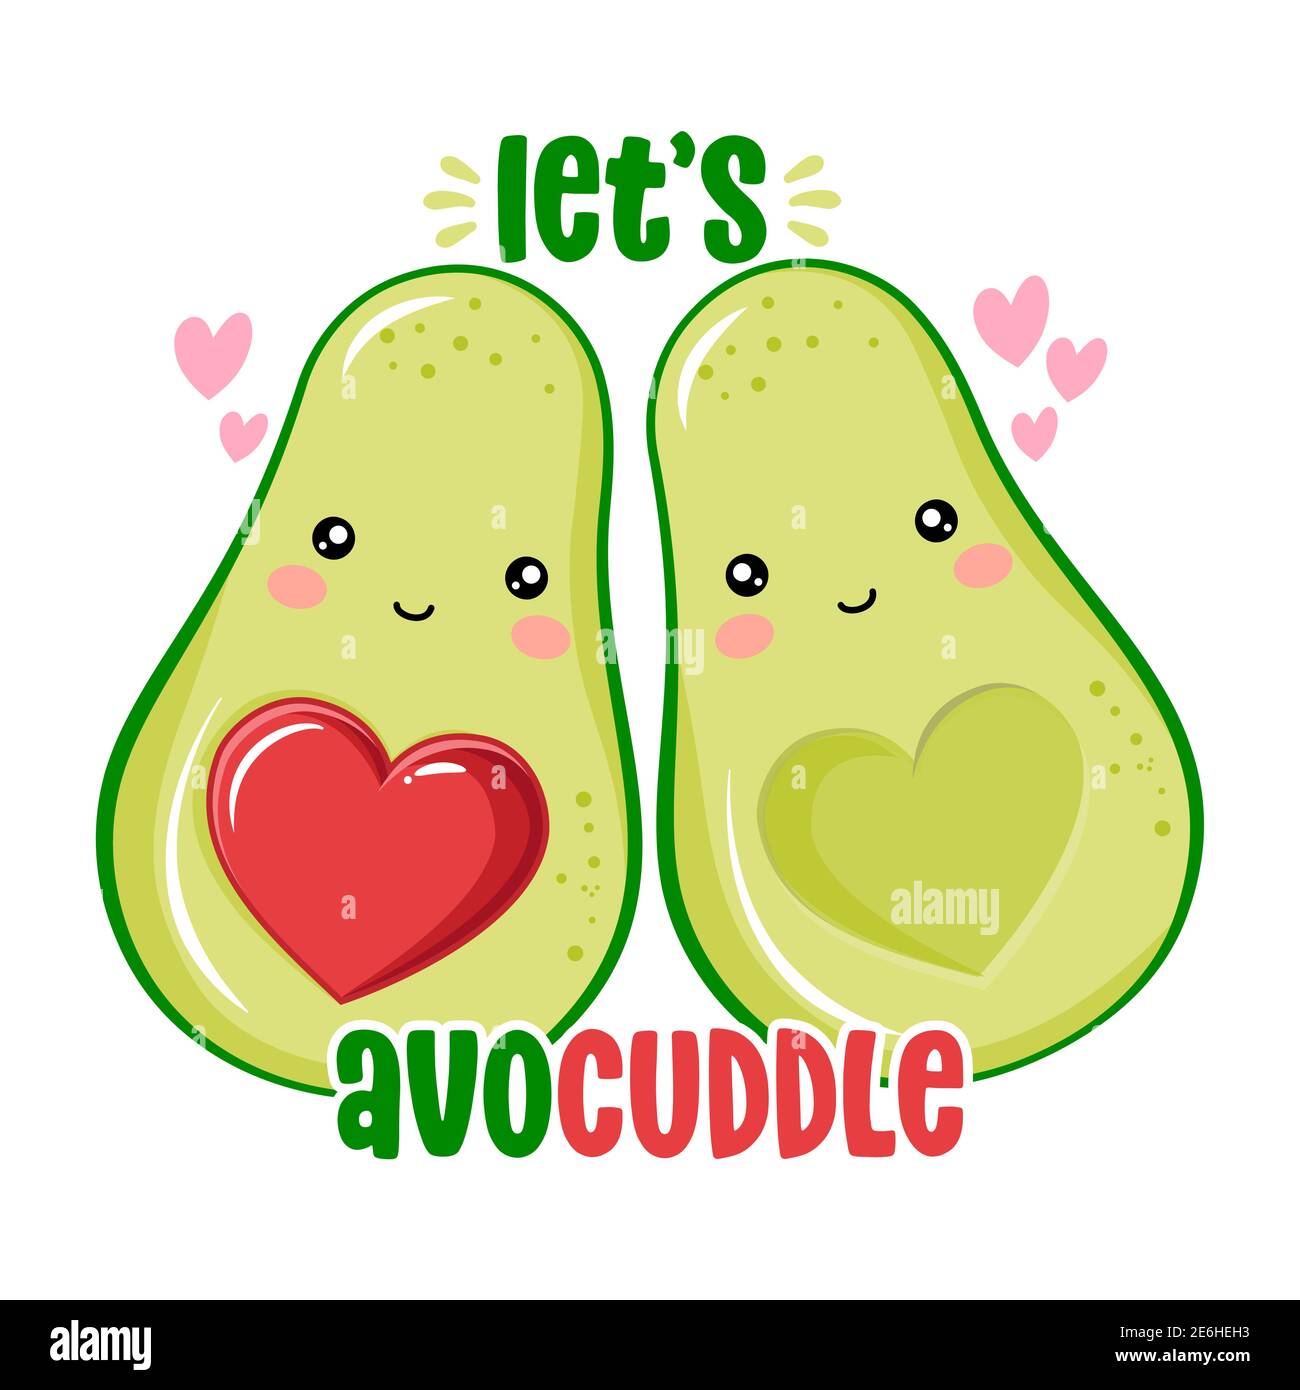 Let\'s Avo Cuddle - Cute style. poster. - color greeting hand Vector drawn Stock Art Valentine\'s posters, Good Alamy Day banners cards, kawaii couple for illustration avocado & Image